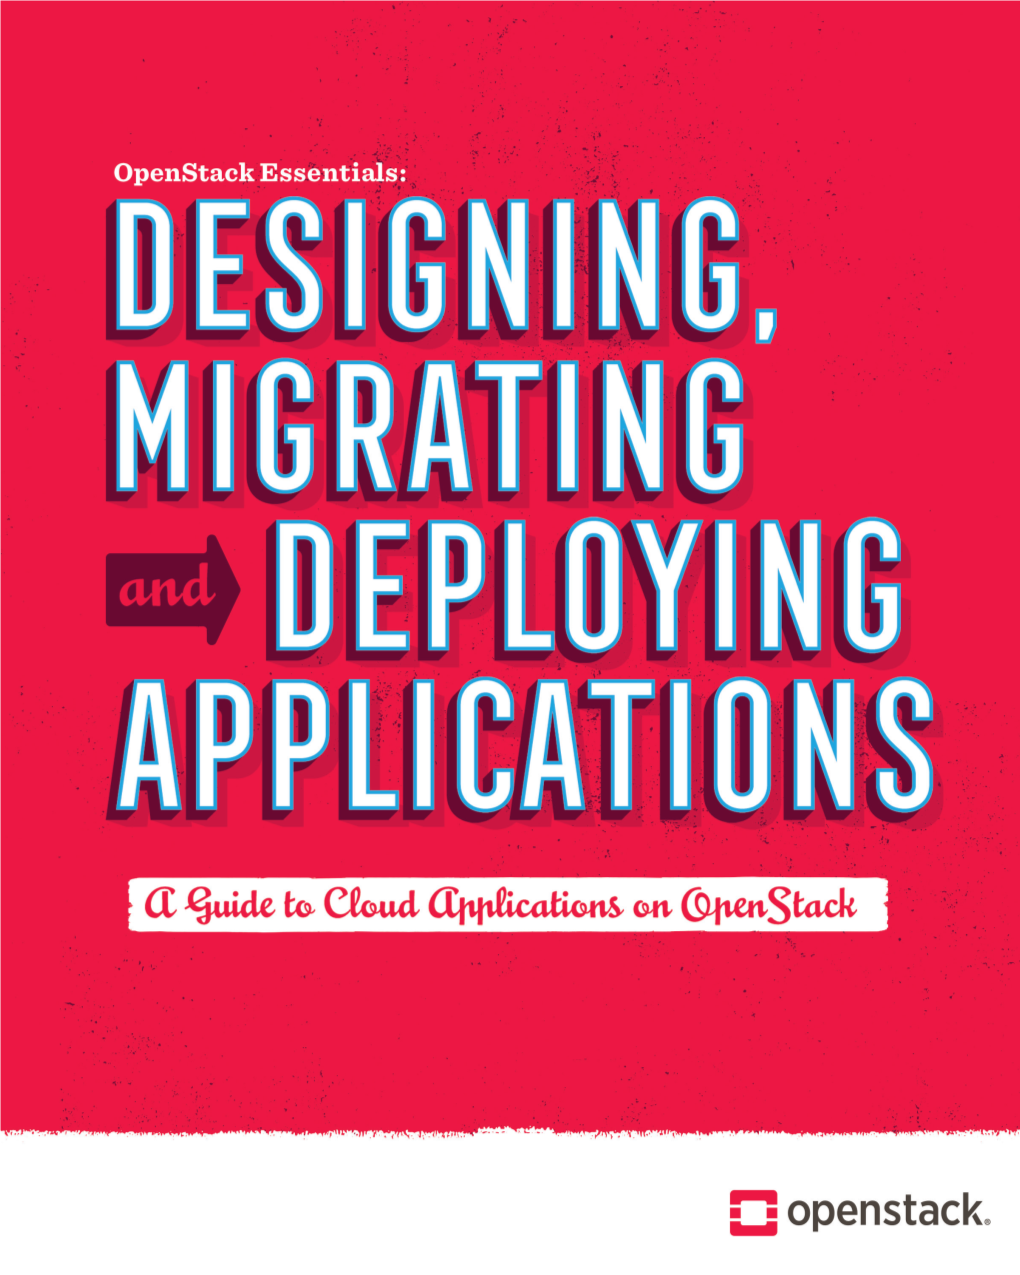 Application Migration to the Cloud: Planning and Patterns 6